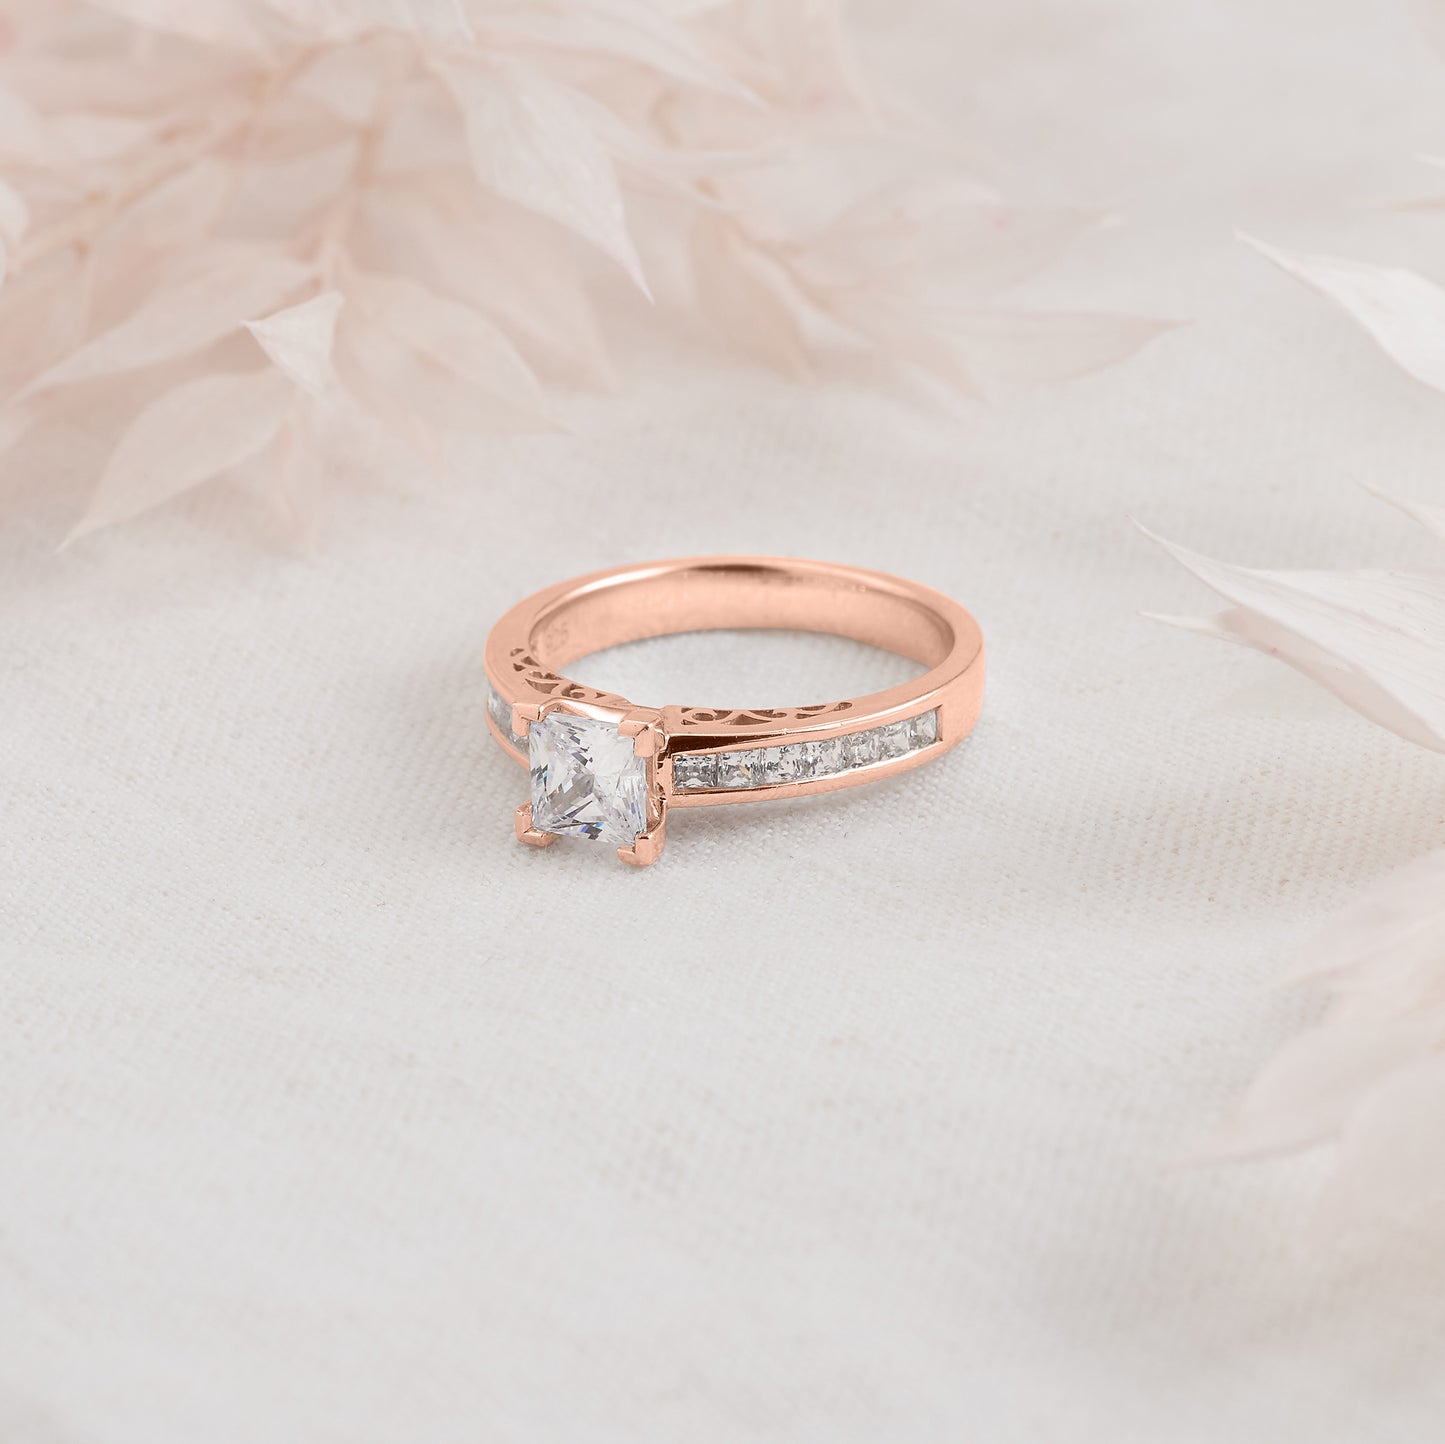 18K Rose Gold Princess Cut Diamond Solitaire With Shoulder Accents Engagement Ring 1.5tdw